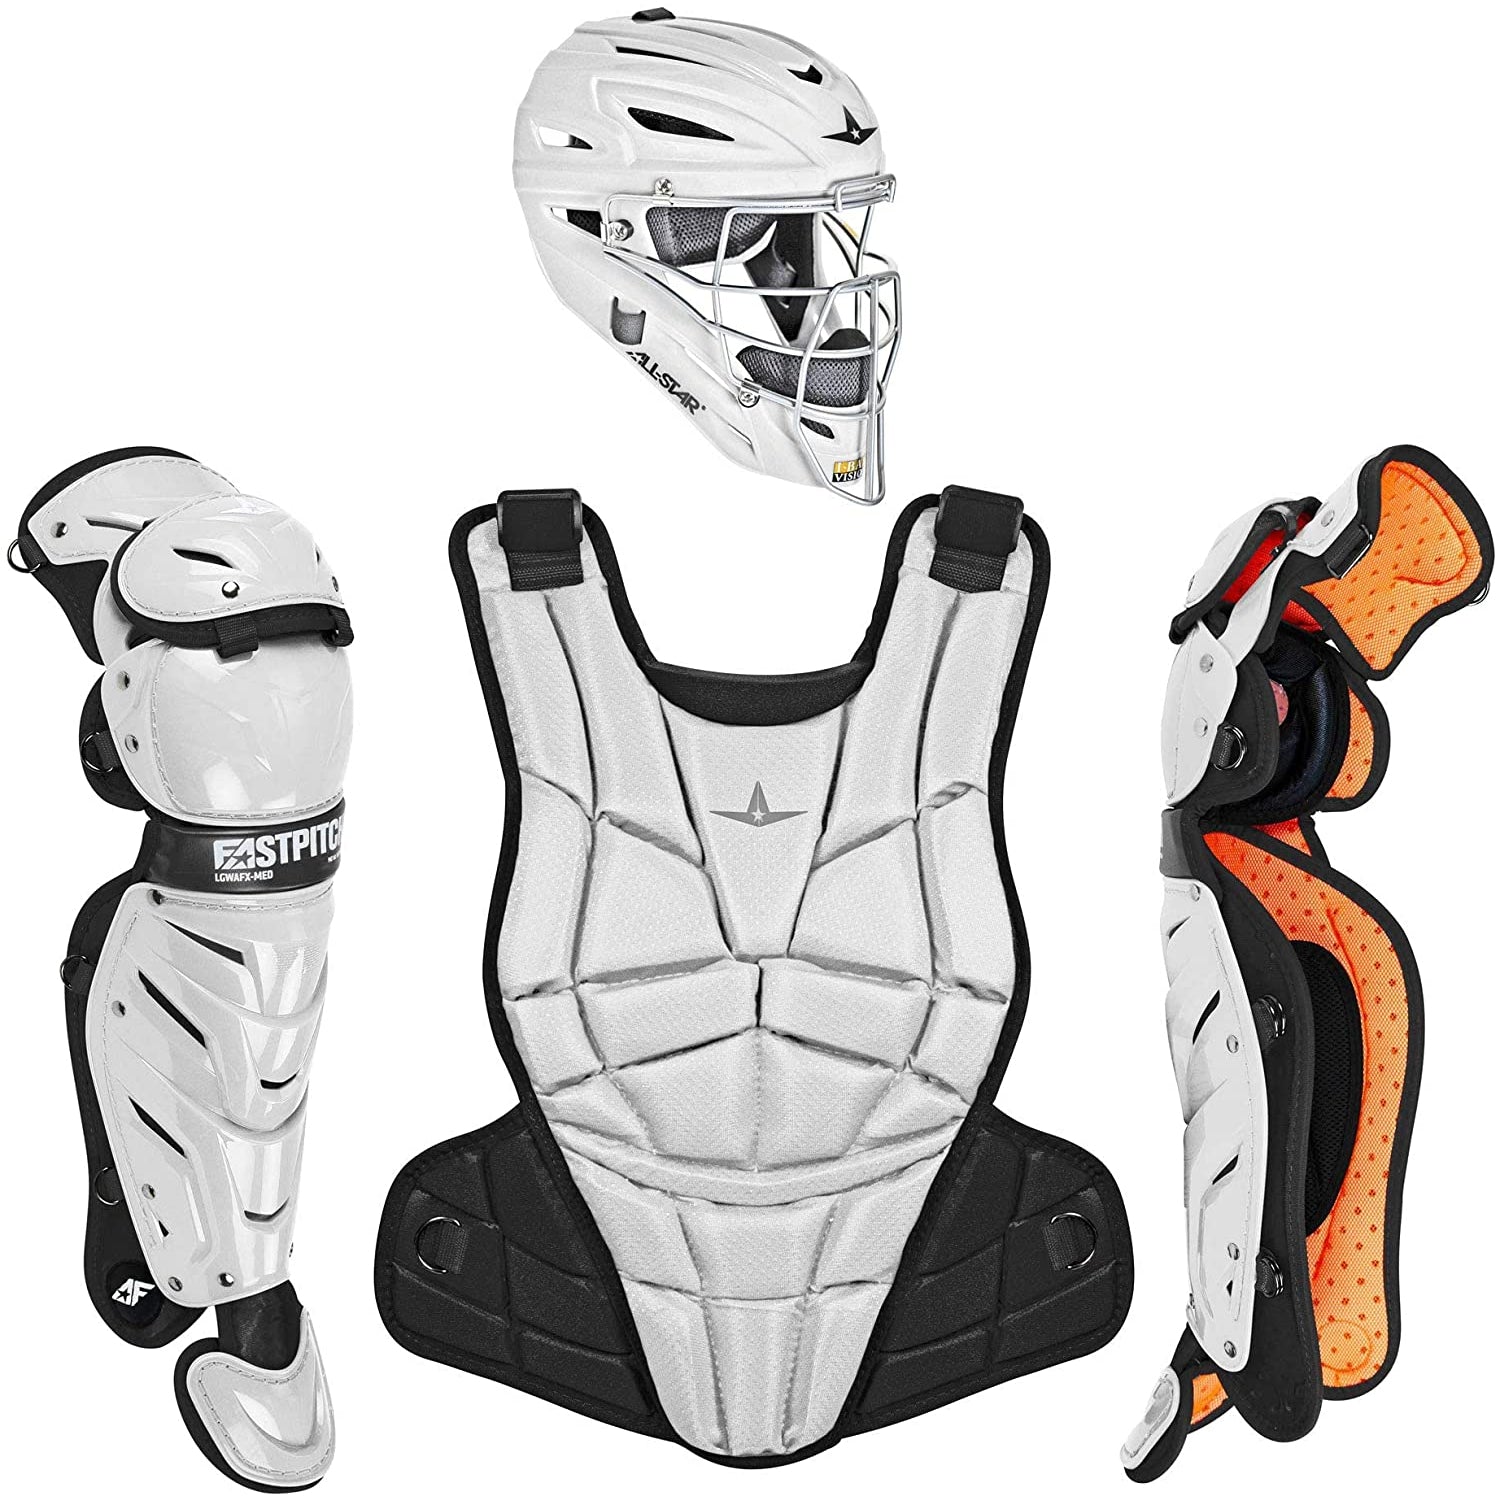 All-Star AFx Series Fastpitch Softball Catcher's Package (White